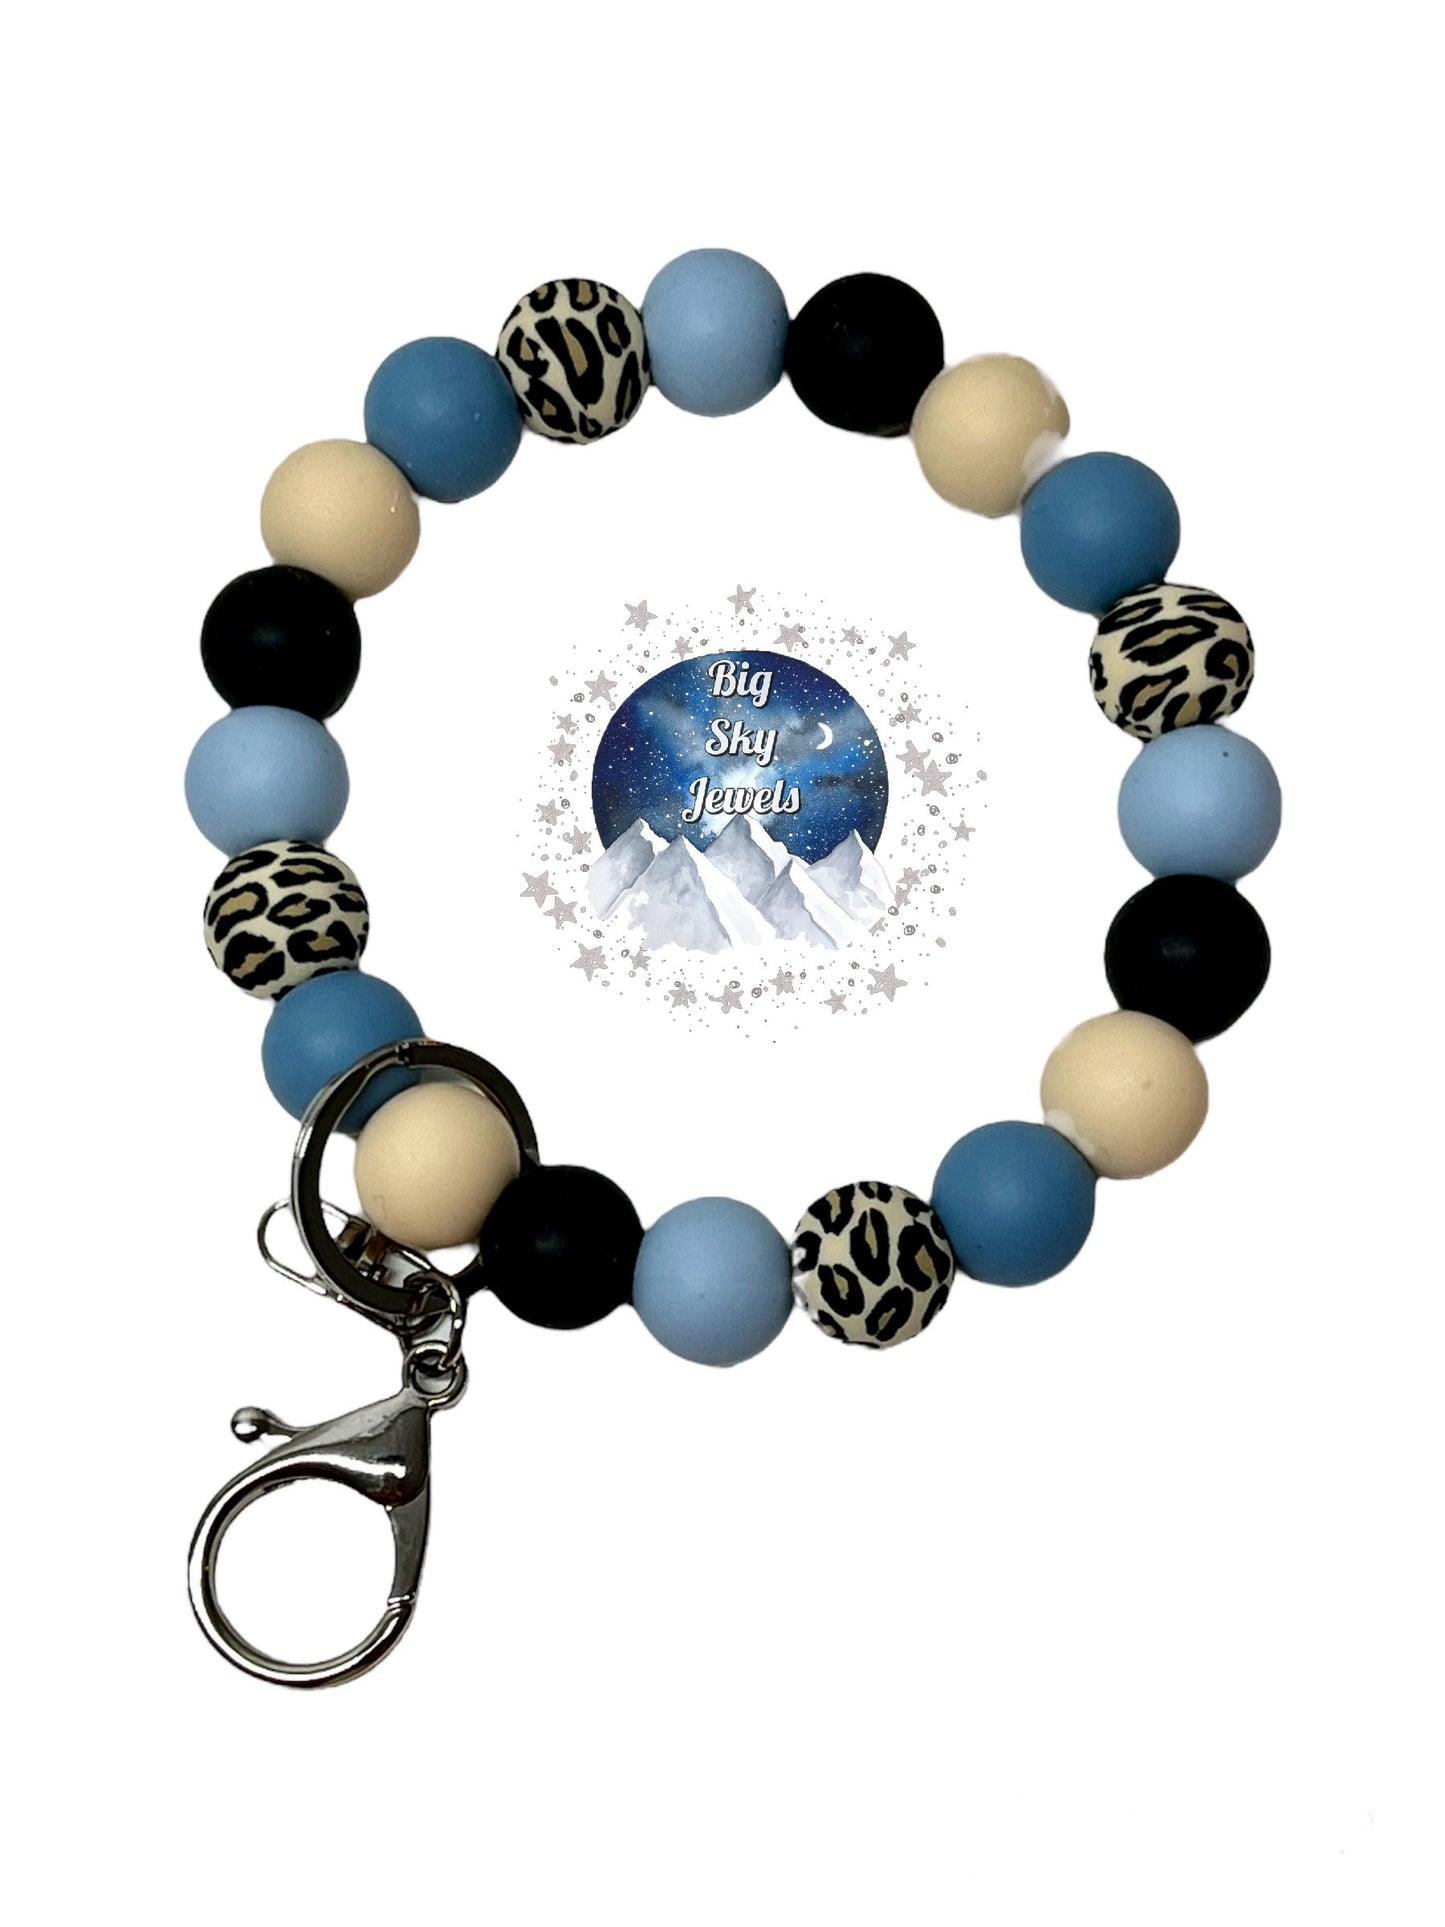 Blue Leopard Silicone Wristlet Keychain NO FOCAL BEAD Leopard Print, Black, Beige, Baby Blue, and Powder Blue. Ages 8+ Kids or Ladies Moms